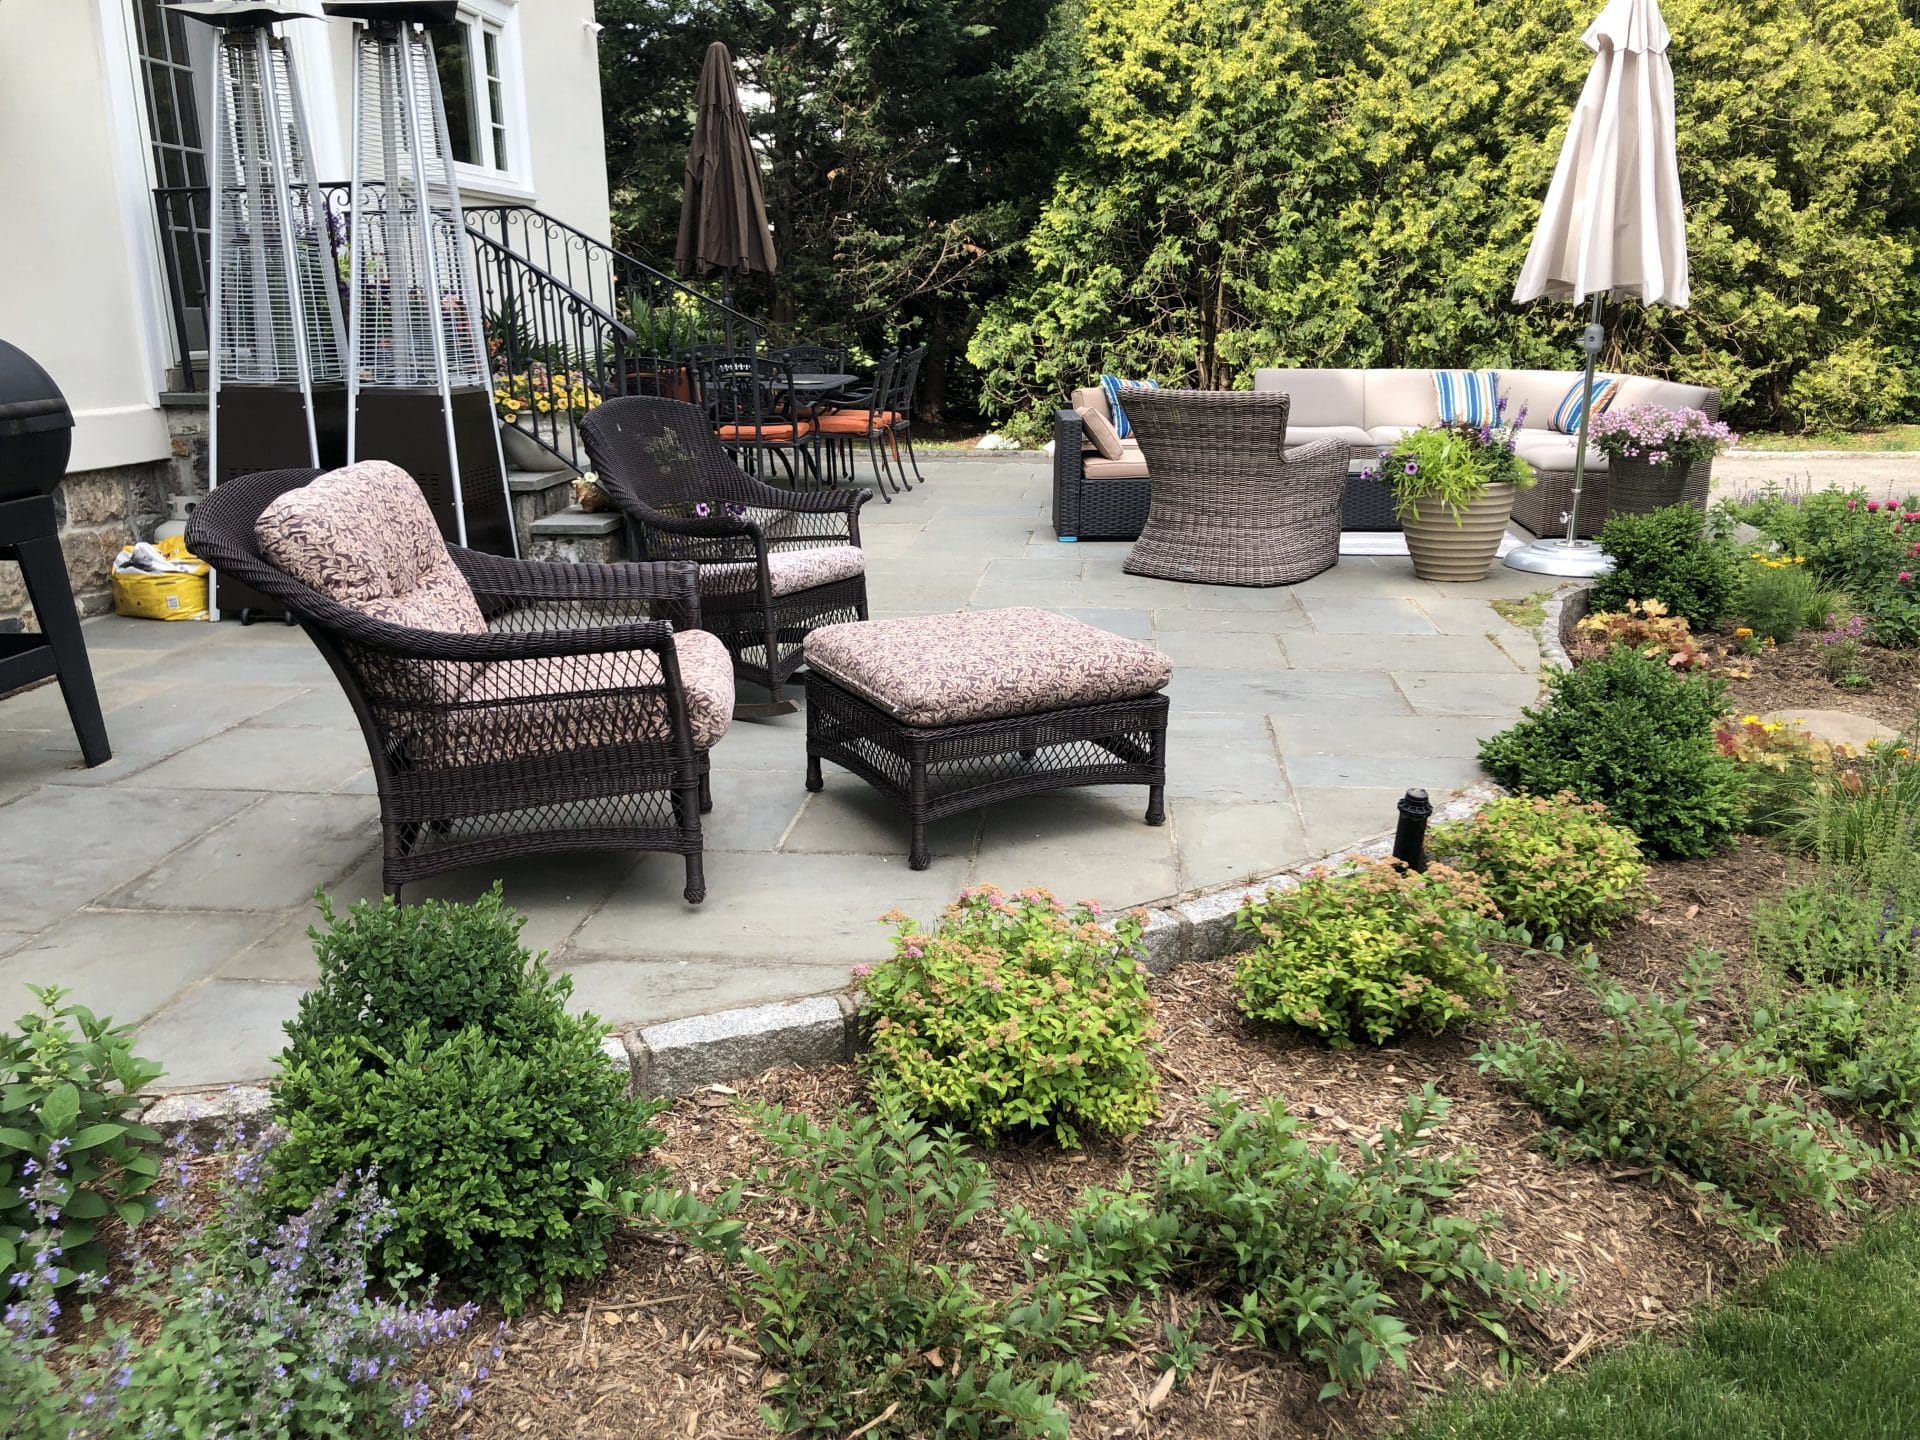 This New Rochelle backyard’s patio is now bordered by flowering shrubs and perennials